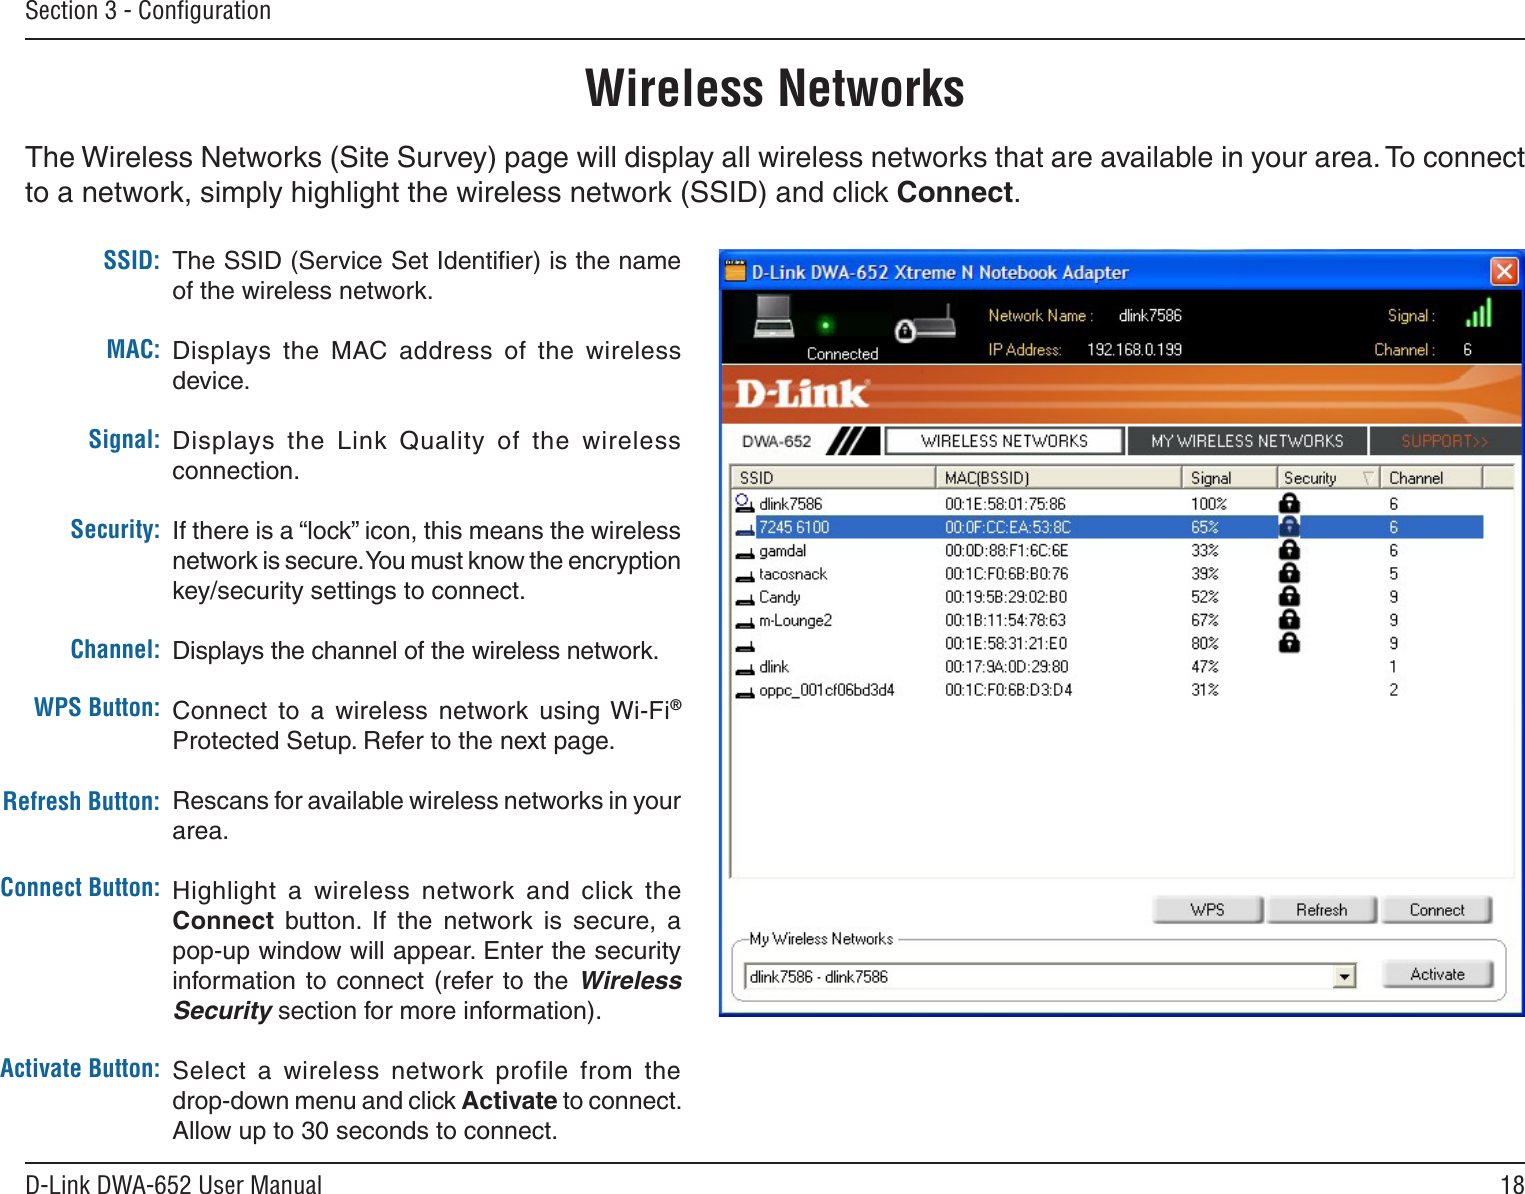 18D-Link DWA-652 User ManualSection 3 - ConﬁgurationWireless NetworksThe SSID (Service Set Identiﬁer) is the name of the wireless network.Displays  the  MAC  address  of  the  wireless device.Displays  the  Link  Quality  of  the  wireless connection. If there is a “lock” icon, this means the wireless network is secure. You must know the encryption key/security settings to connect.Displays the channel of the wireless network.Connect  to  a  wireless  network  using Wi-Fi® Protected Setup. Refer to the next page.Rescans for available wireless networks in your area.Highlight  a  wireless  network  and  click  the Connect  button.  If  the  network  is  secure,  a pop-up window will appear. Enter the security information to connect (refer to the Wireless Security section for more information).Select  a  wireless  network  profile  from  the  drop-down menu and click Activate to connect. Allow up to 30 seconds to connect.MAC:SSID:Channel:Signal:Security:Refresh Button:Connect Button:Activate Button:The Wireless Networks (Site Survey) page will display all wireless networks that are available in your area. To connect to a network, simply highlight the wireless network (SSID) and click Connect.WPS Button: